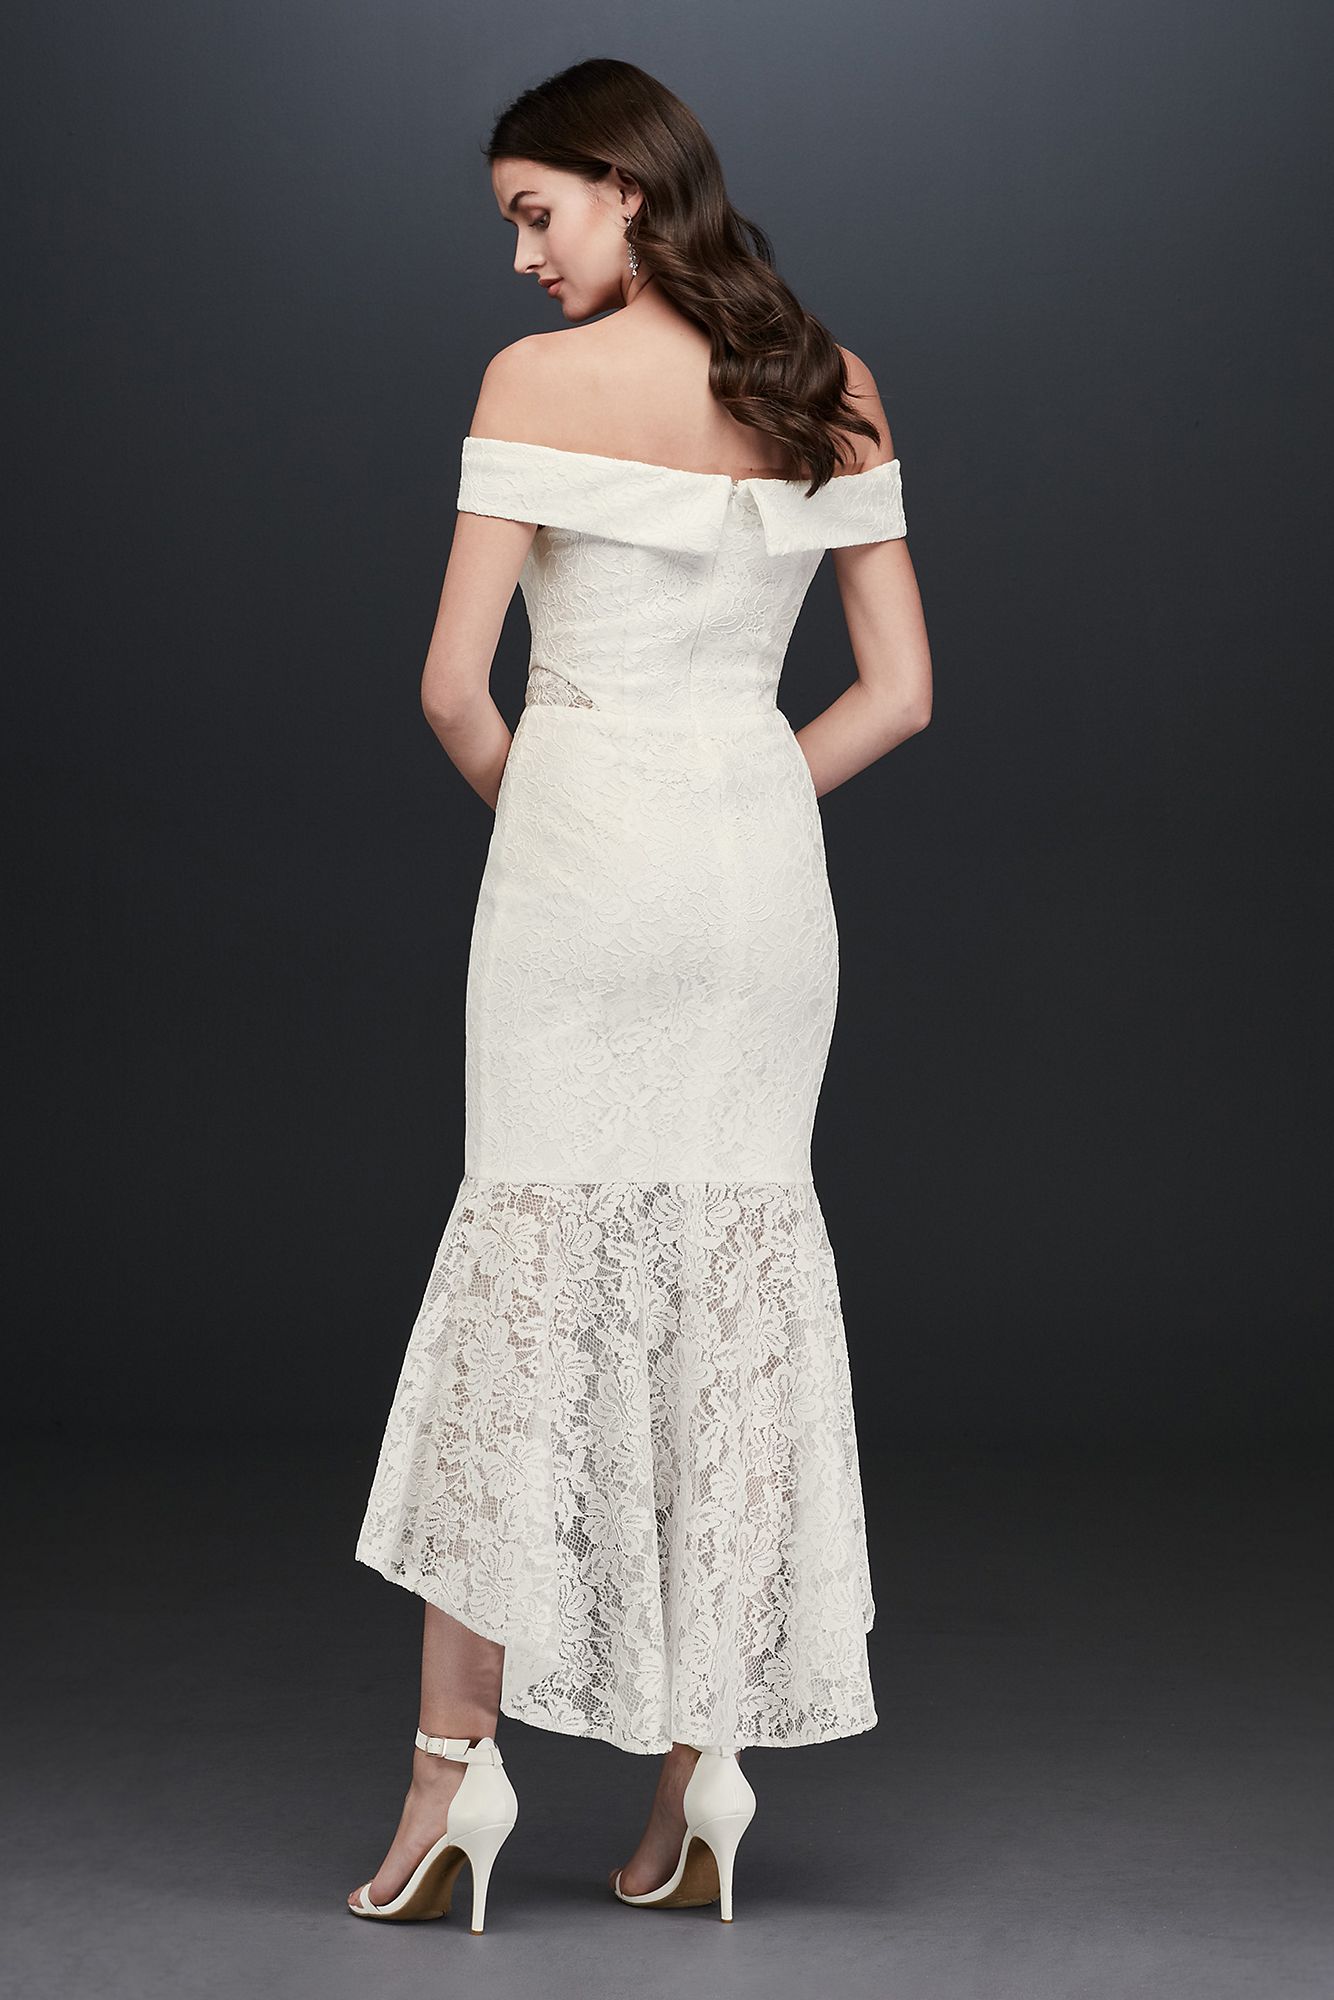 Sexy Off-the-Shoulder High Low Bridal Lace Gown Style 1450X